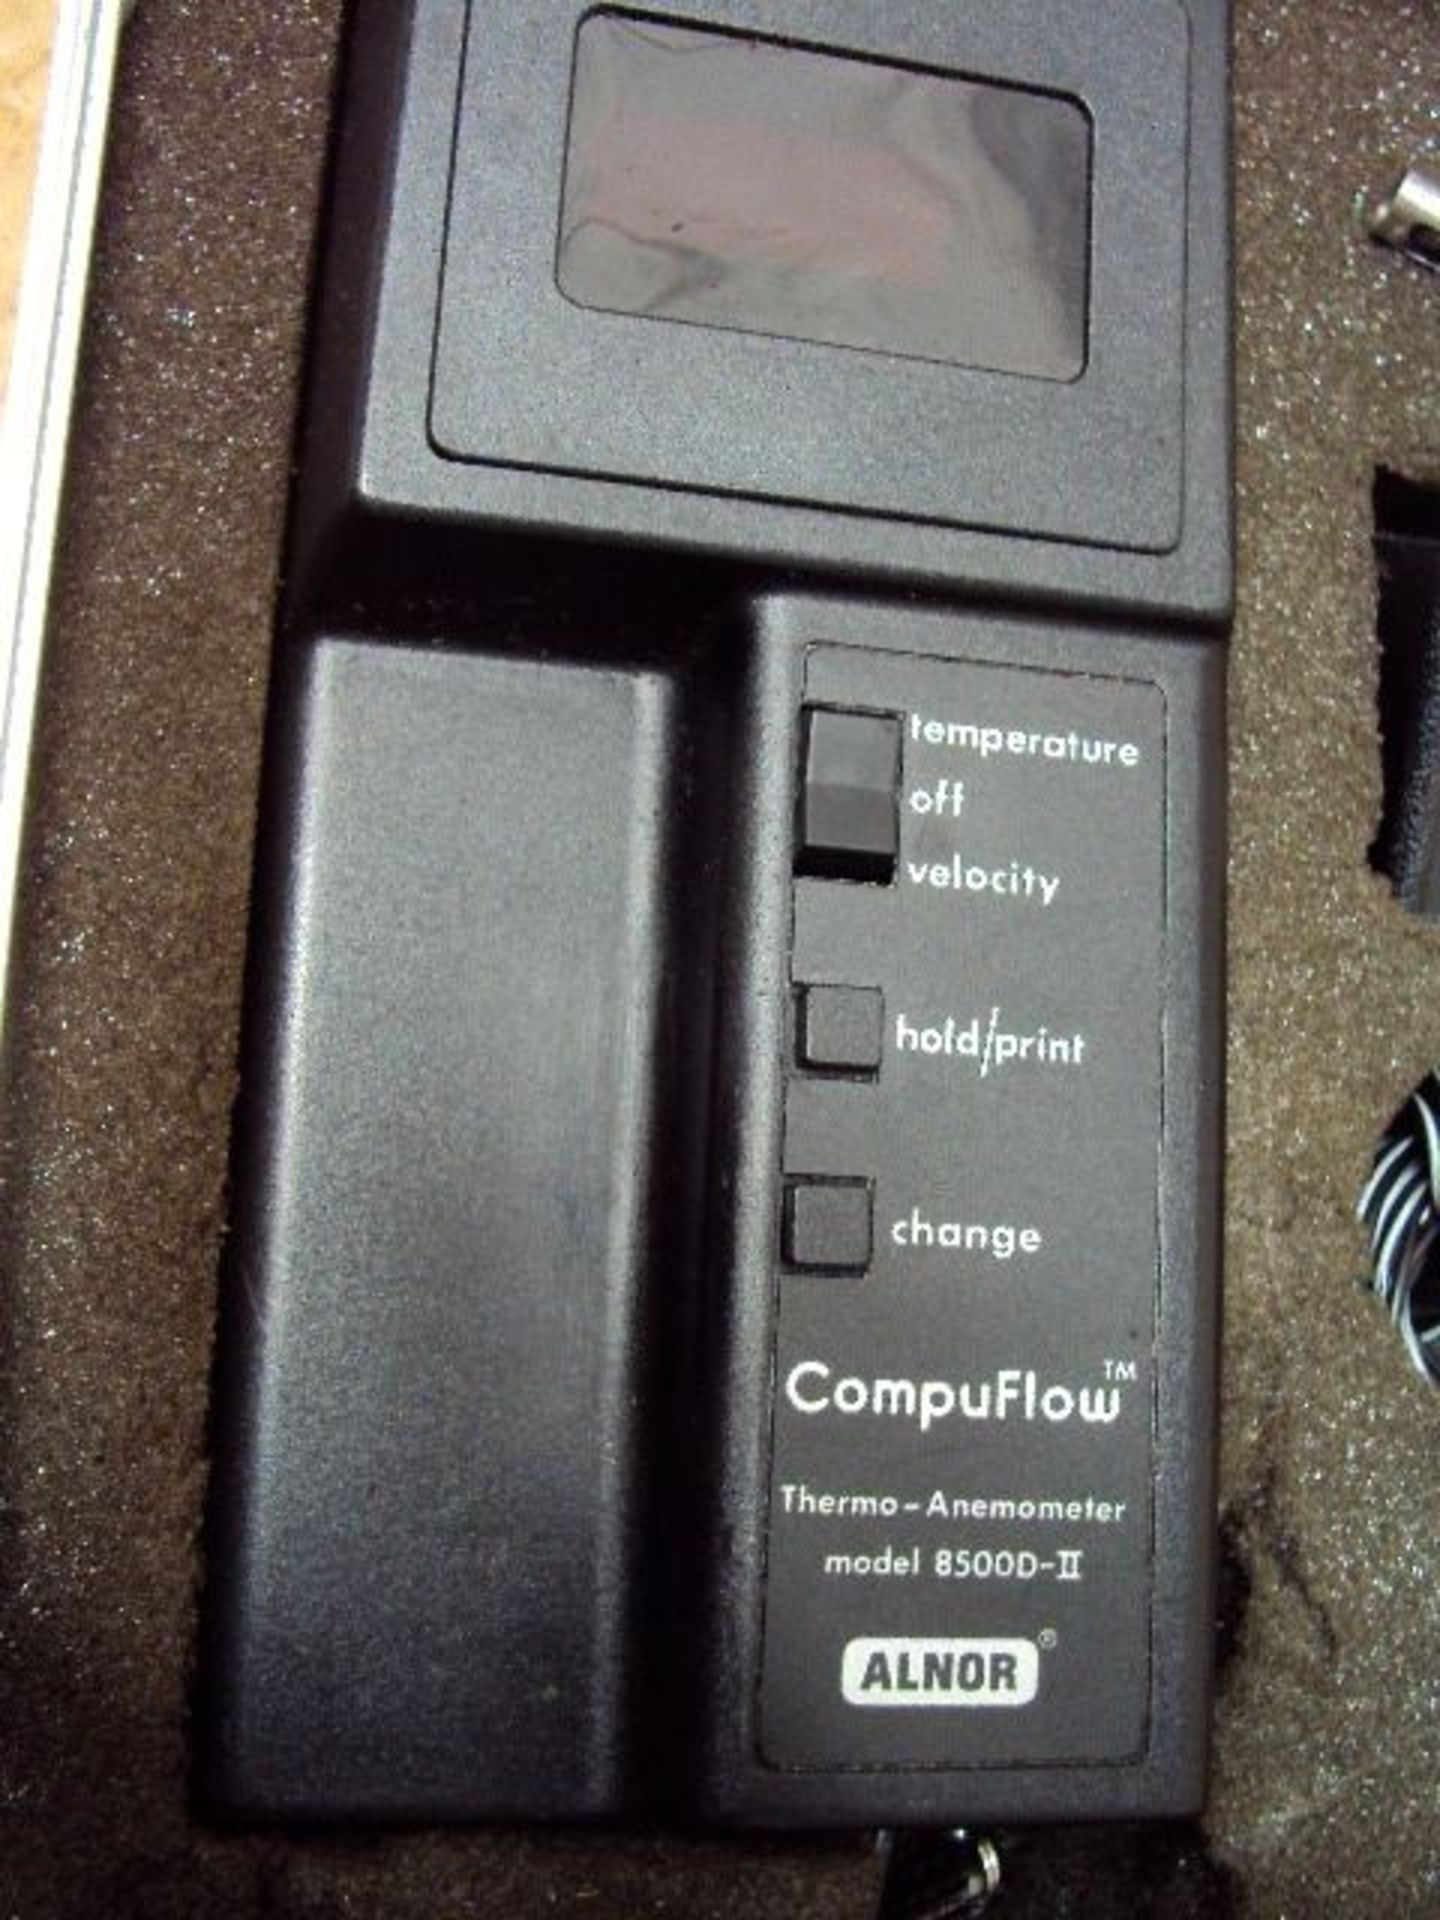 Alnor Model 8500D-II Compuflow Thermo Anemometer w/Charger & Wand in Padded Case - No Batteries /248 - Image 3 of 5